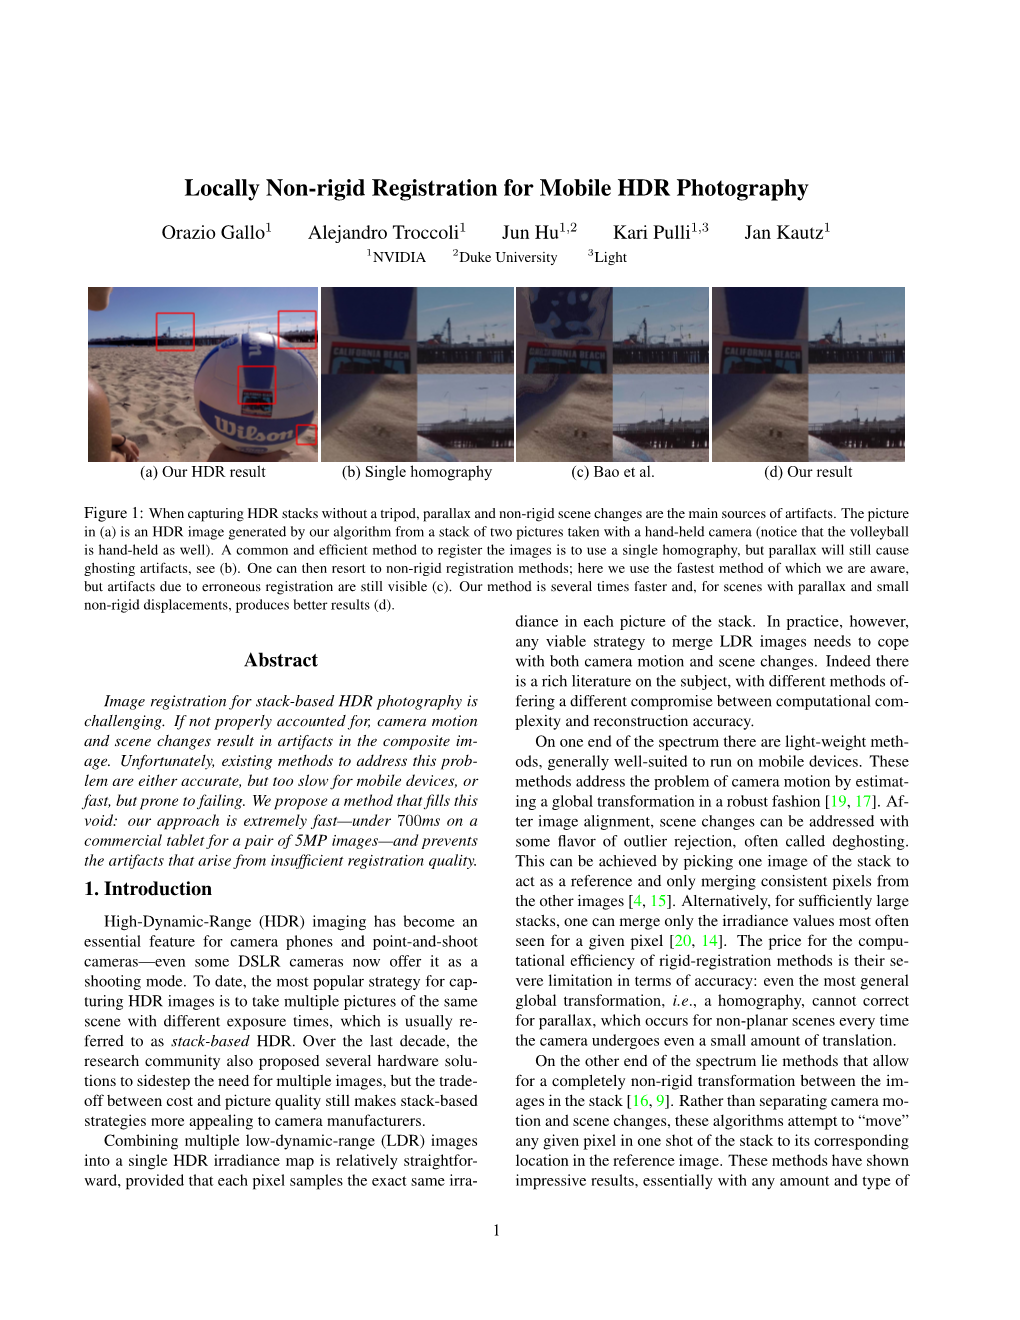 Locally Non-Rigid Registration for Mobile HDR Photography